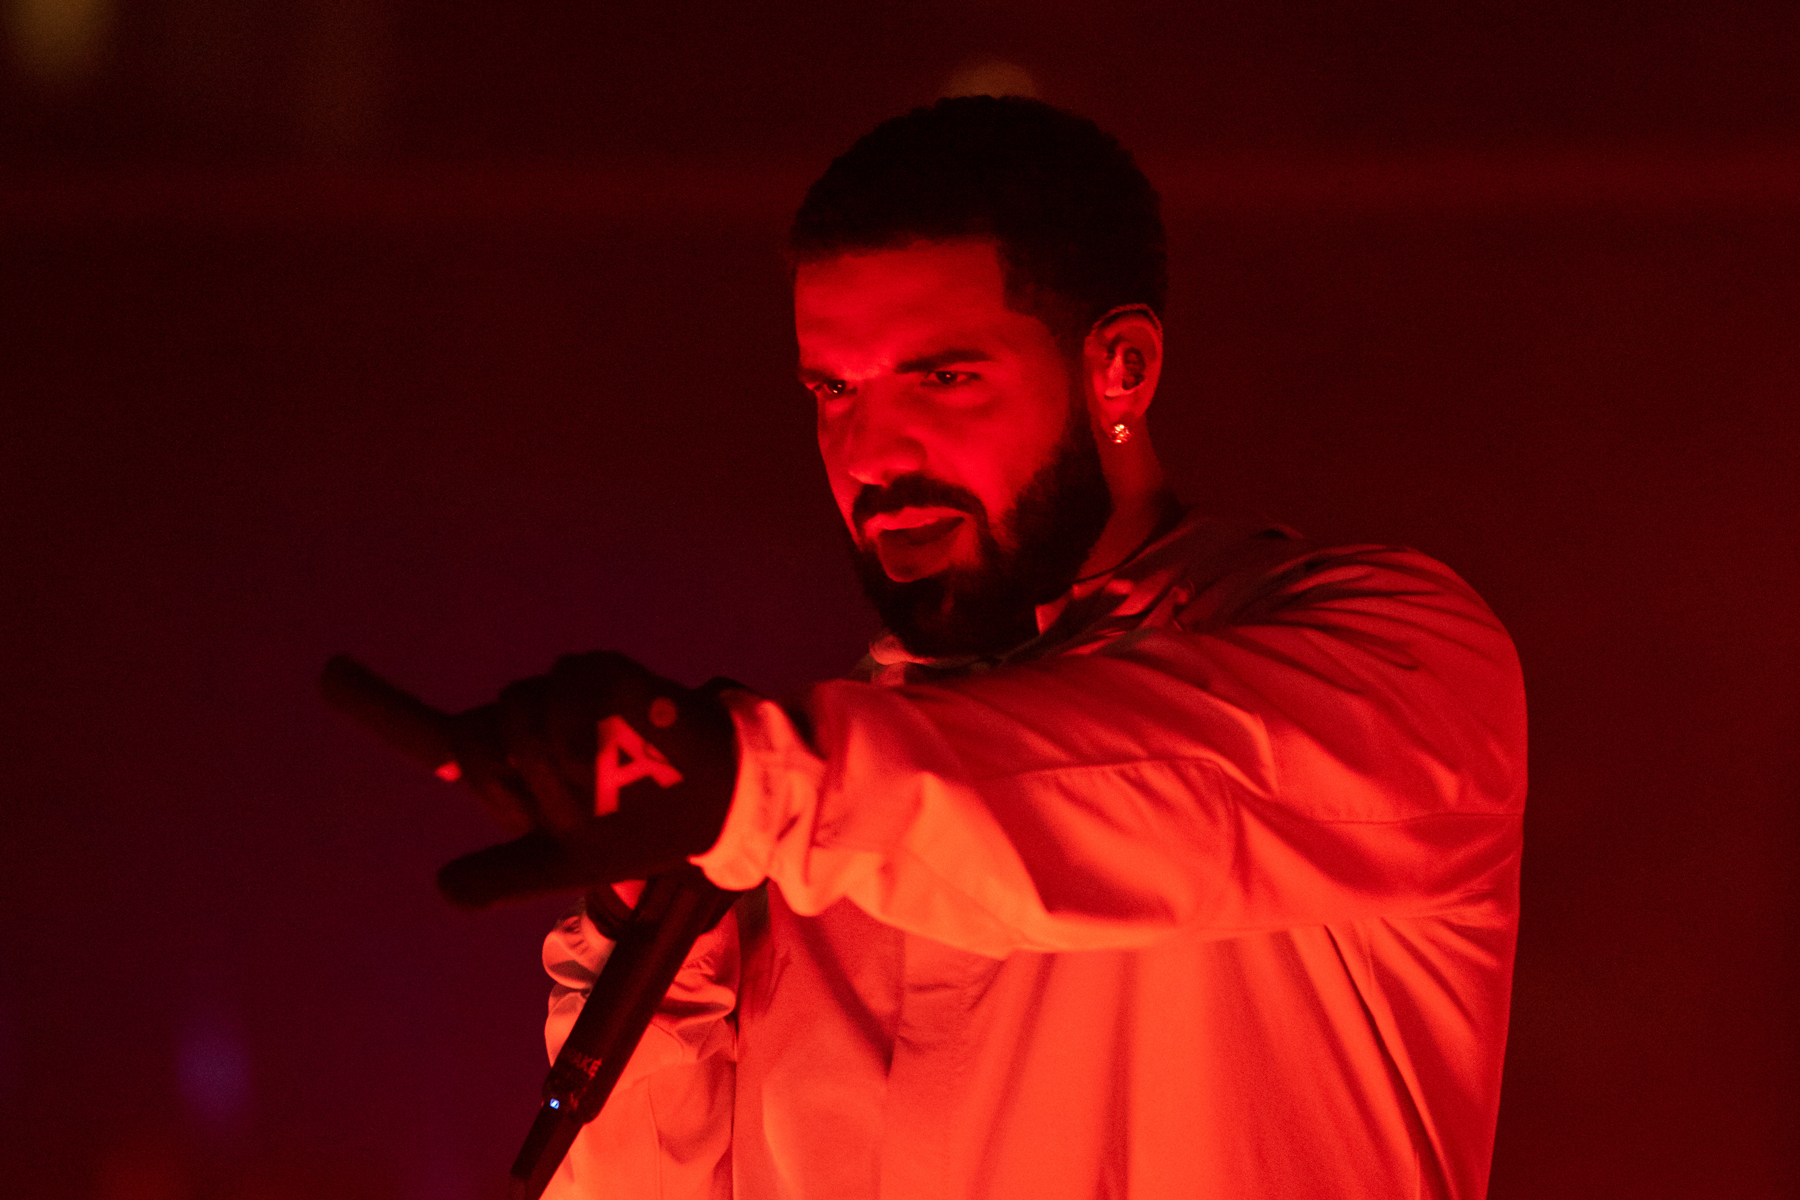 LOS ANGELES, CALIFORNIA - FEBRUARY 12: Drake performs at 'HOMECOMING WEEKEND' Hosted By The h.wood Group & REVOLVE, Presented By PLACES.CO and Flow.com, Produced By Uncommon Entertainment on February 12, 2022 in Los Angeles, California. (Photo by Vivien Killilea/Getty Images  for Homecoming Weekend )